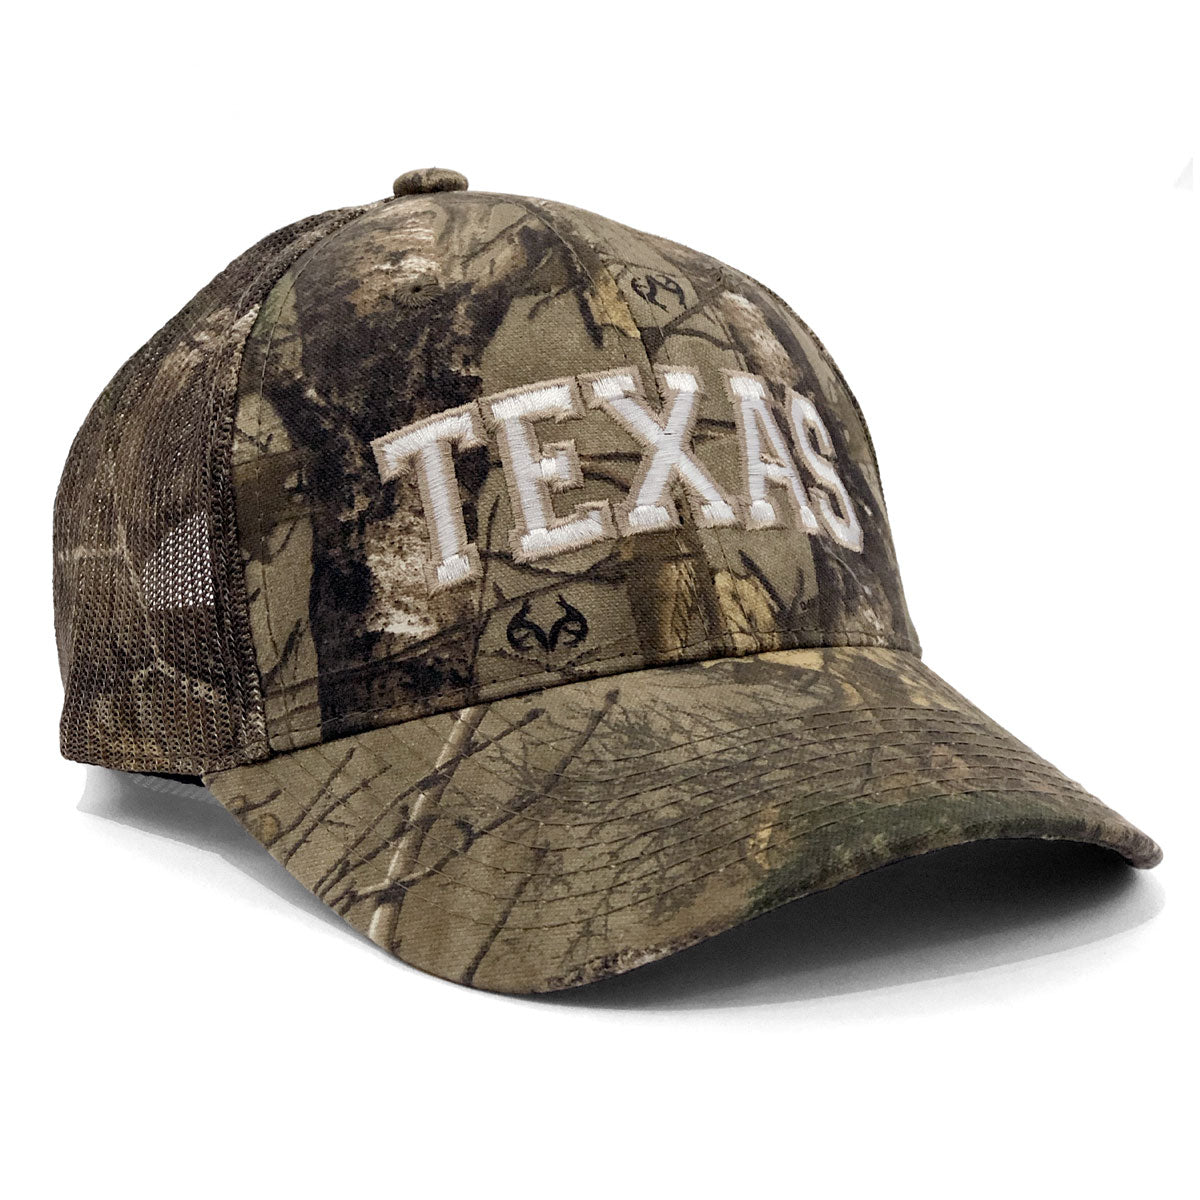 Texas Arched Word Cap